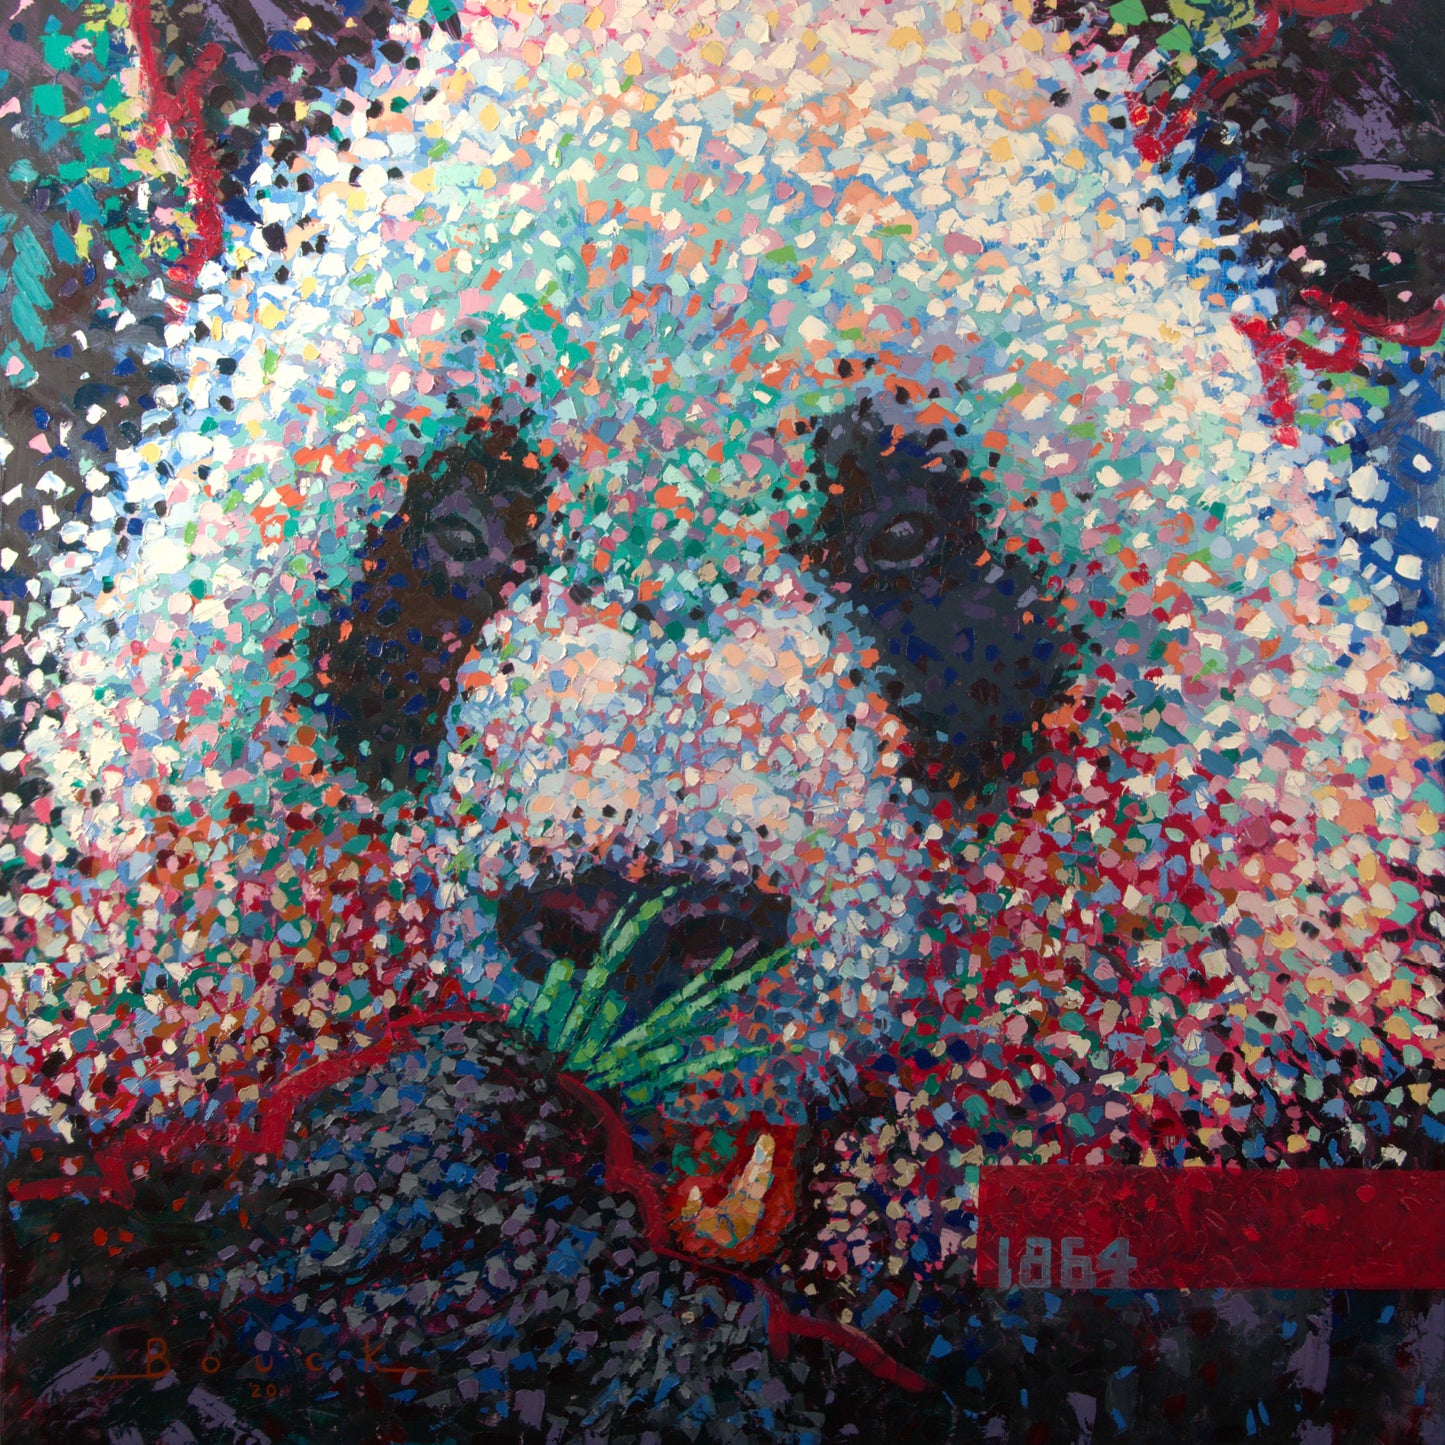 An abstract painting of a panda bear eating bamboo in a colorful mosaic background. Painted in shatter impressionism style with broad colorful strokes